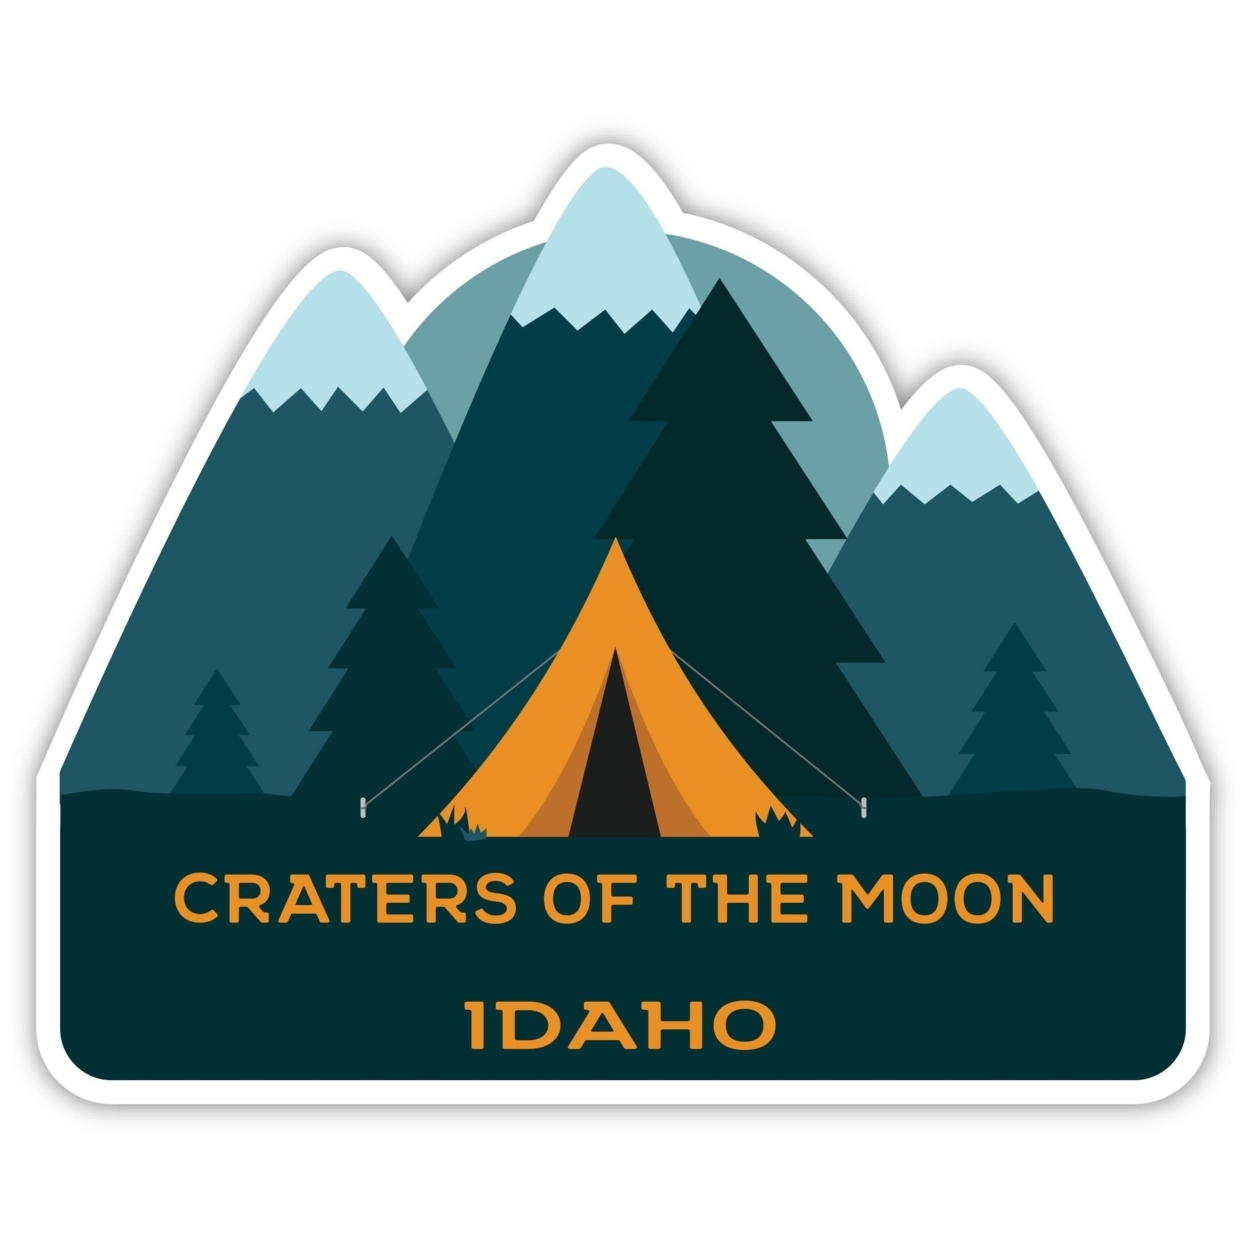 Craters Of The Moon Idaho Souvenir Decorative Stickers (Choose Theme And Size) - Single Unit, 4-Inch, Tent